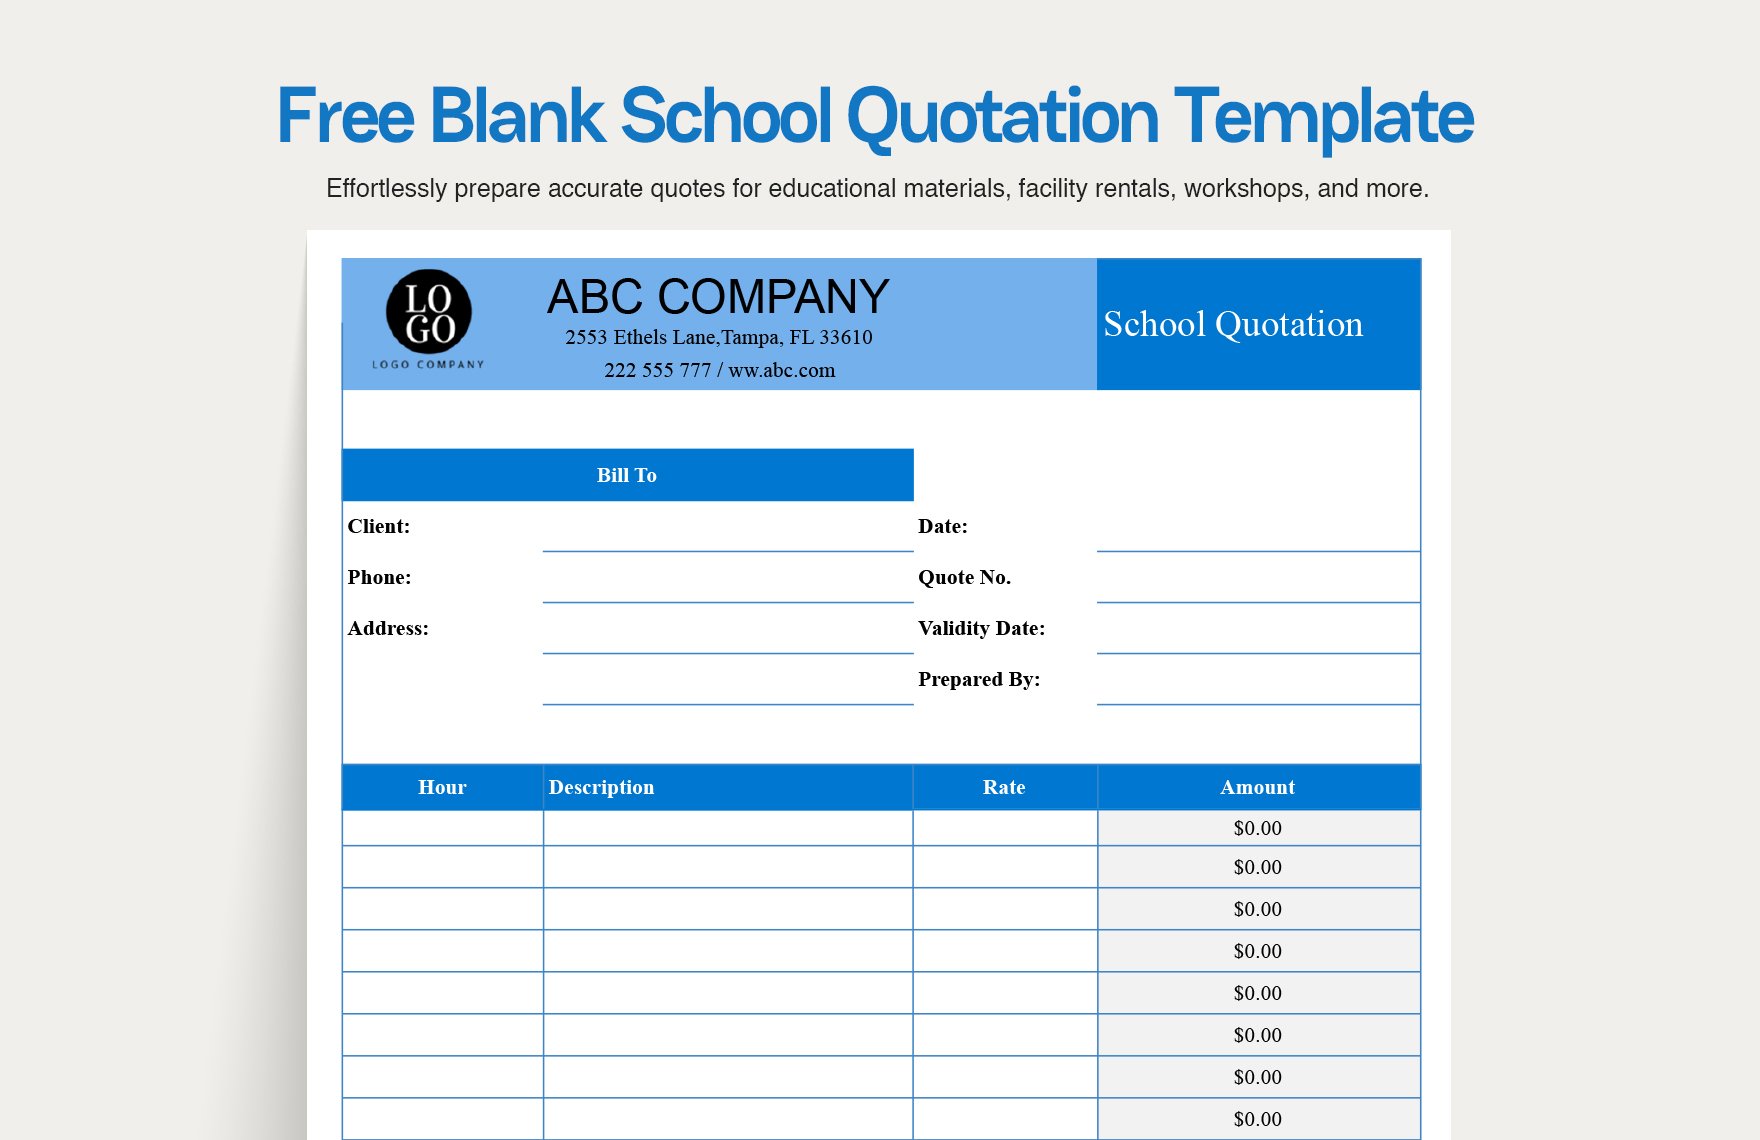 Blank School Quotation Template in Word, Google Docs, Excel, Google Sheets